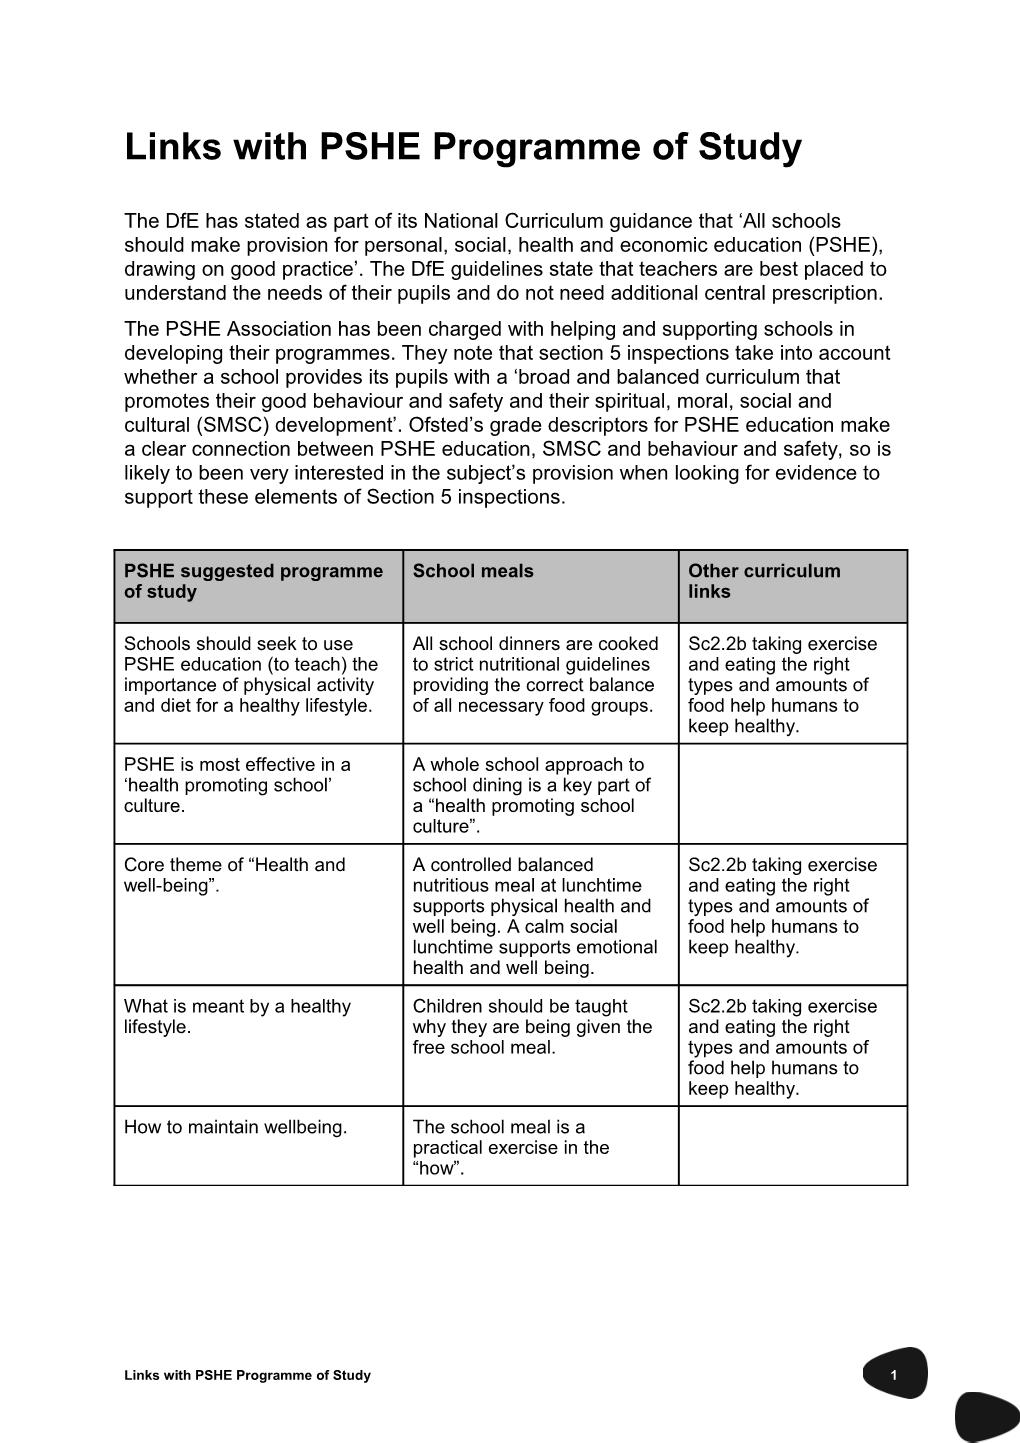 Links with PSHE Programme of Study